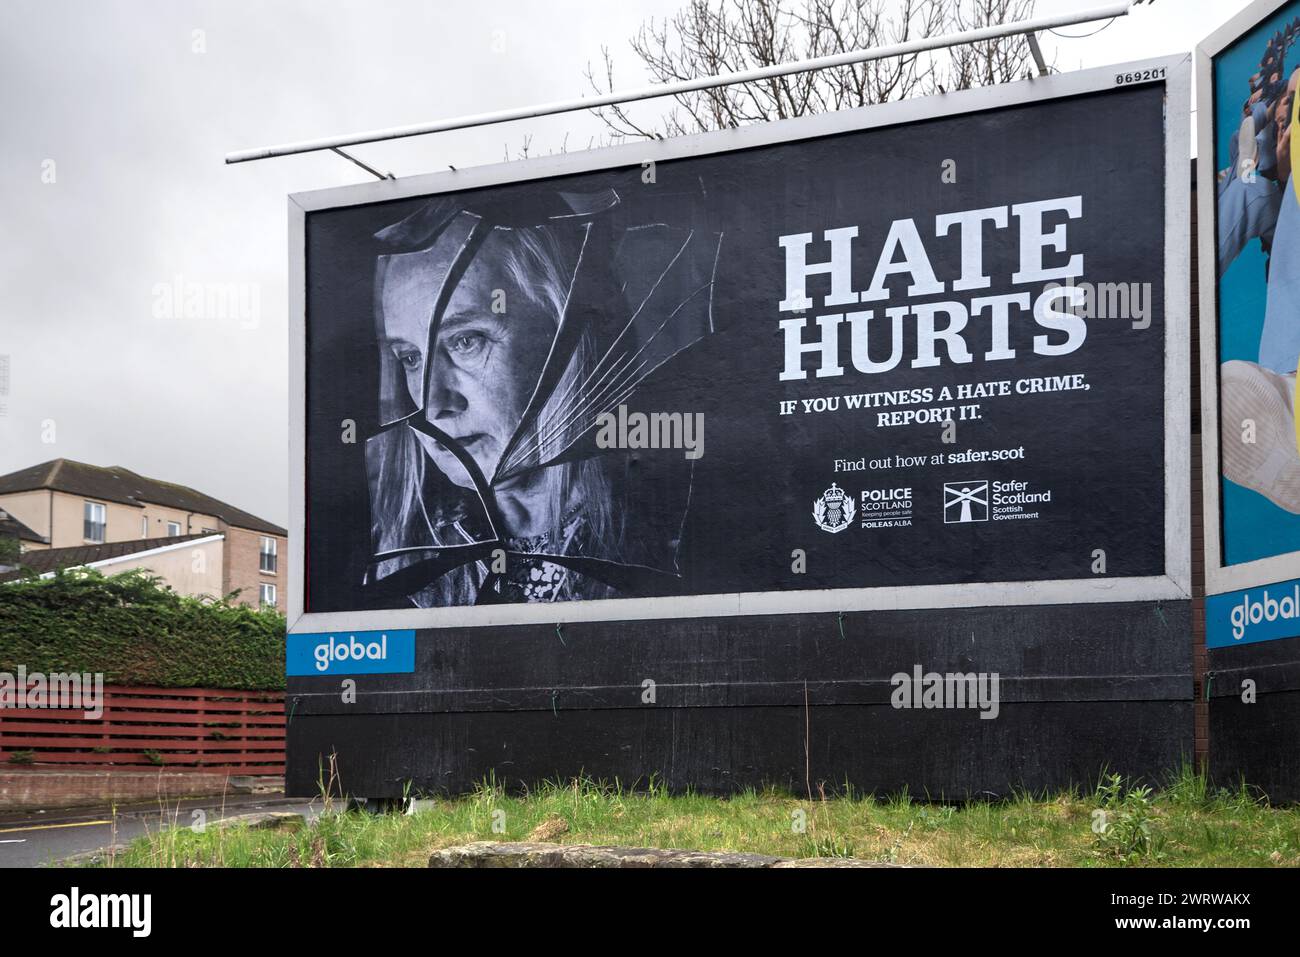 Hate Hurts Billboard, campaign by Police Scotland and Safer Scotland Scottish Government to raise public awareness regarding the impact of hate crime. Stock Photo